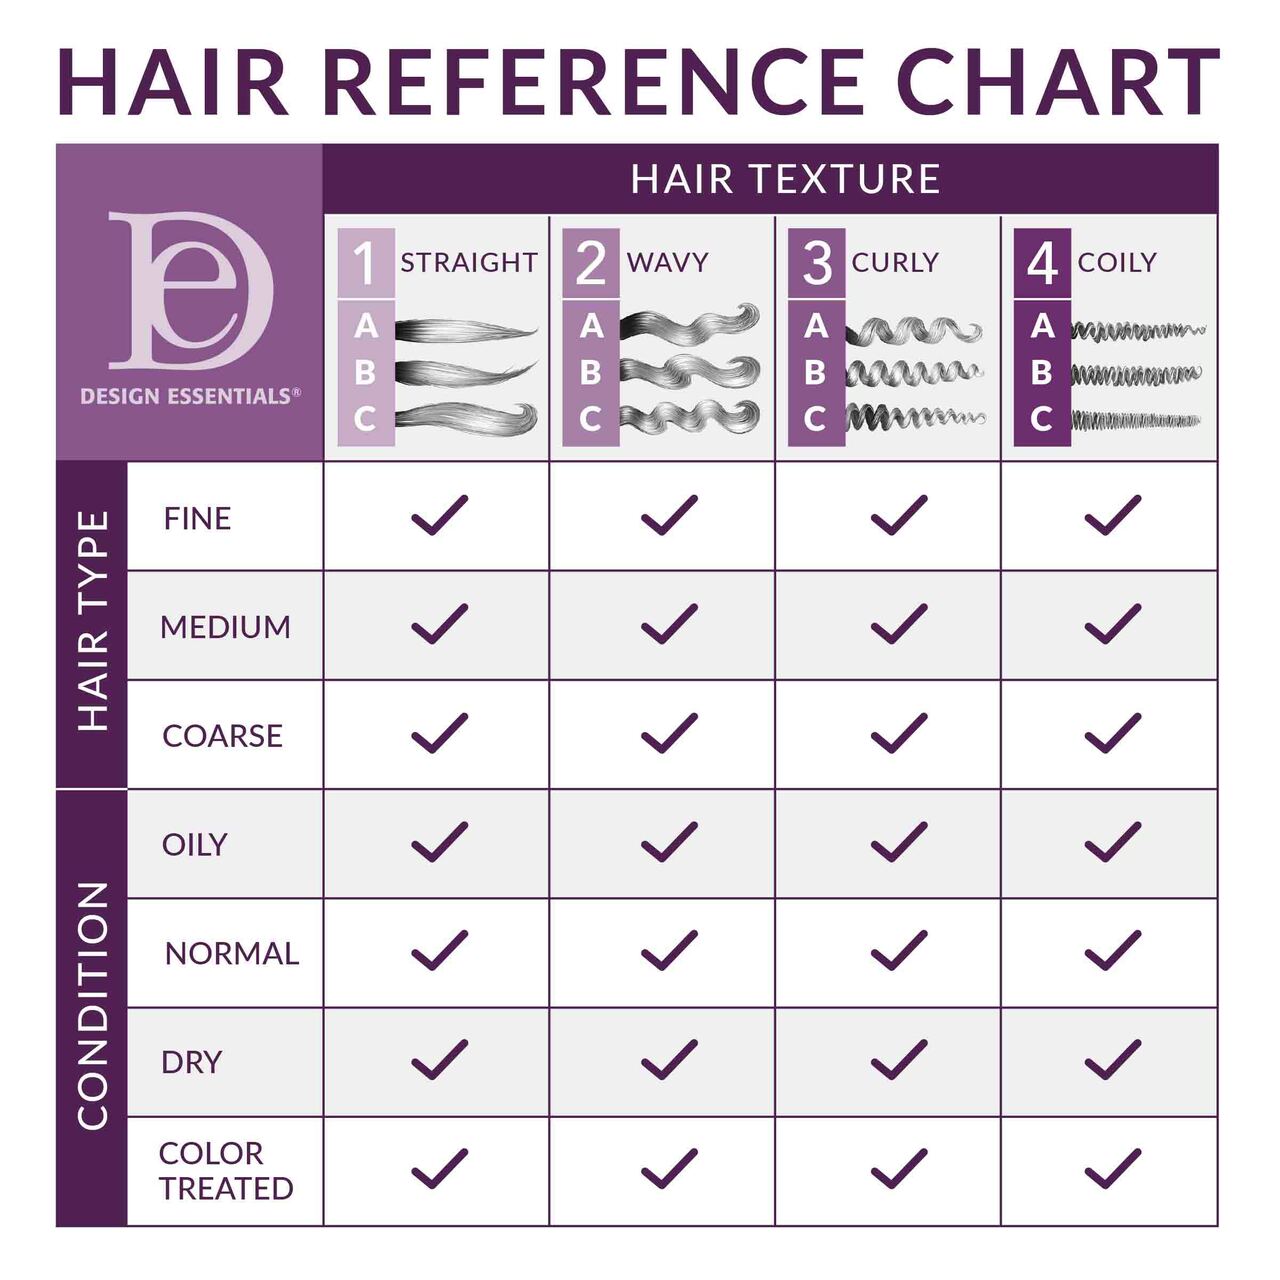 Silk_Essentials_Thermal_Strengthening_Serum_-_Hair_Reference_Chart__31275.1632344470